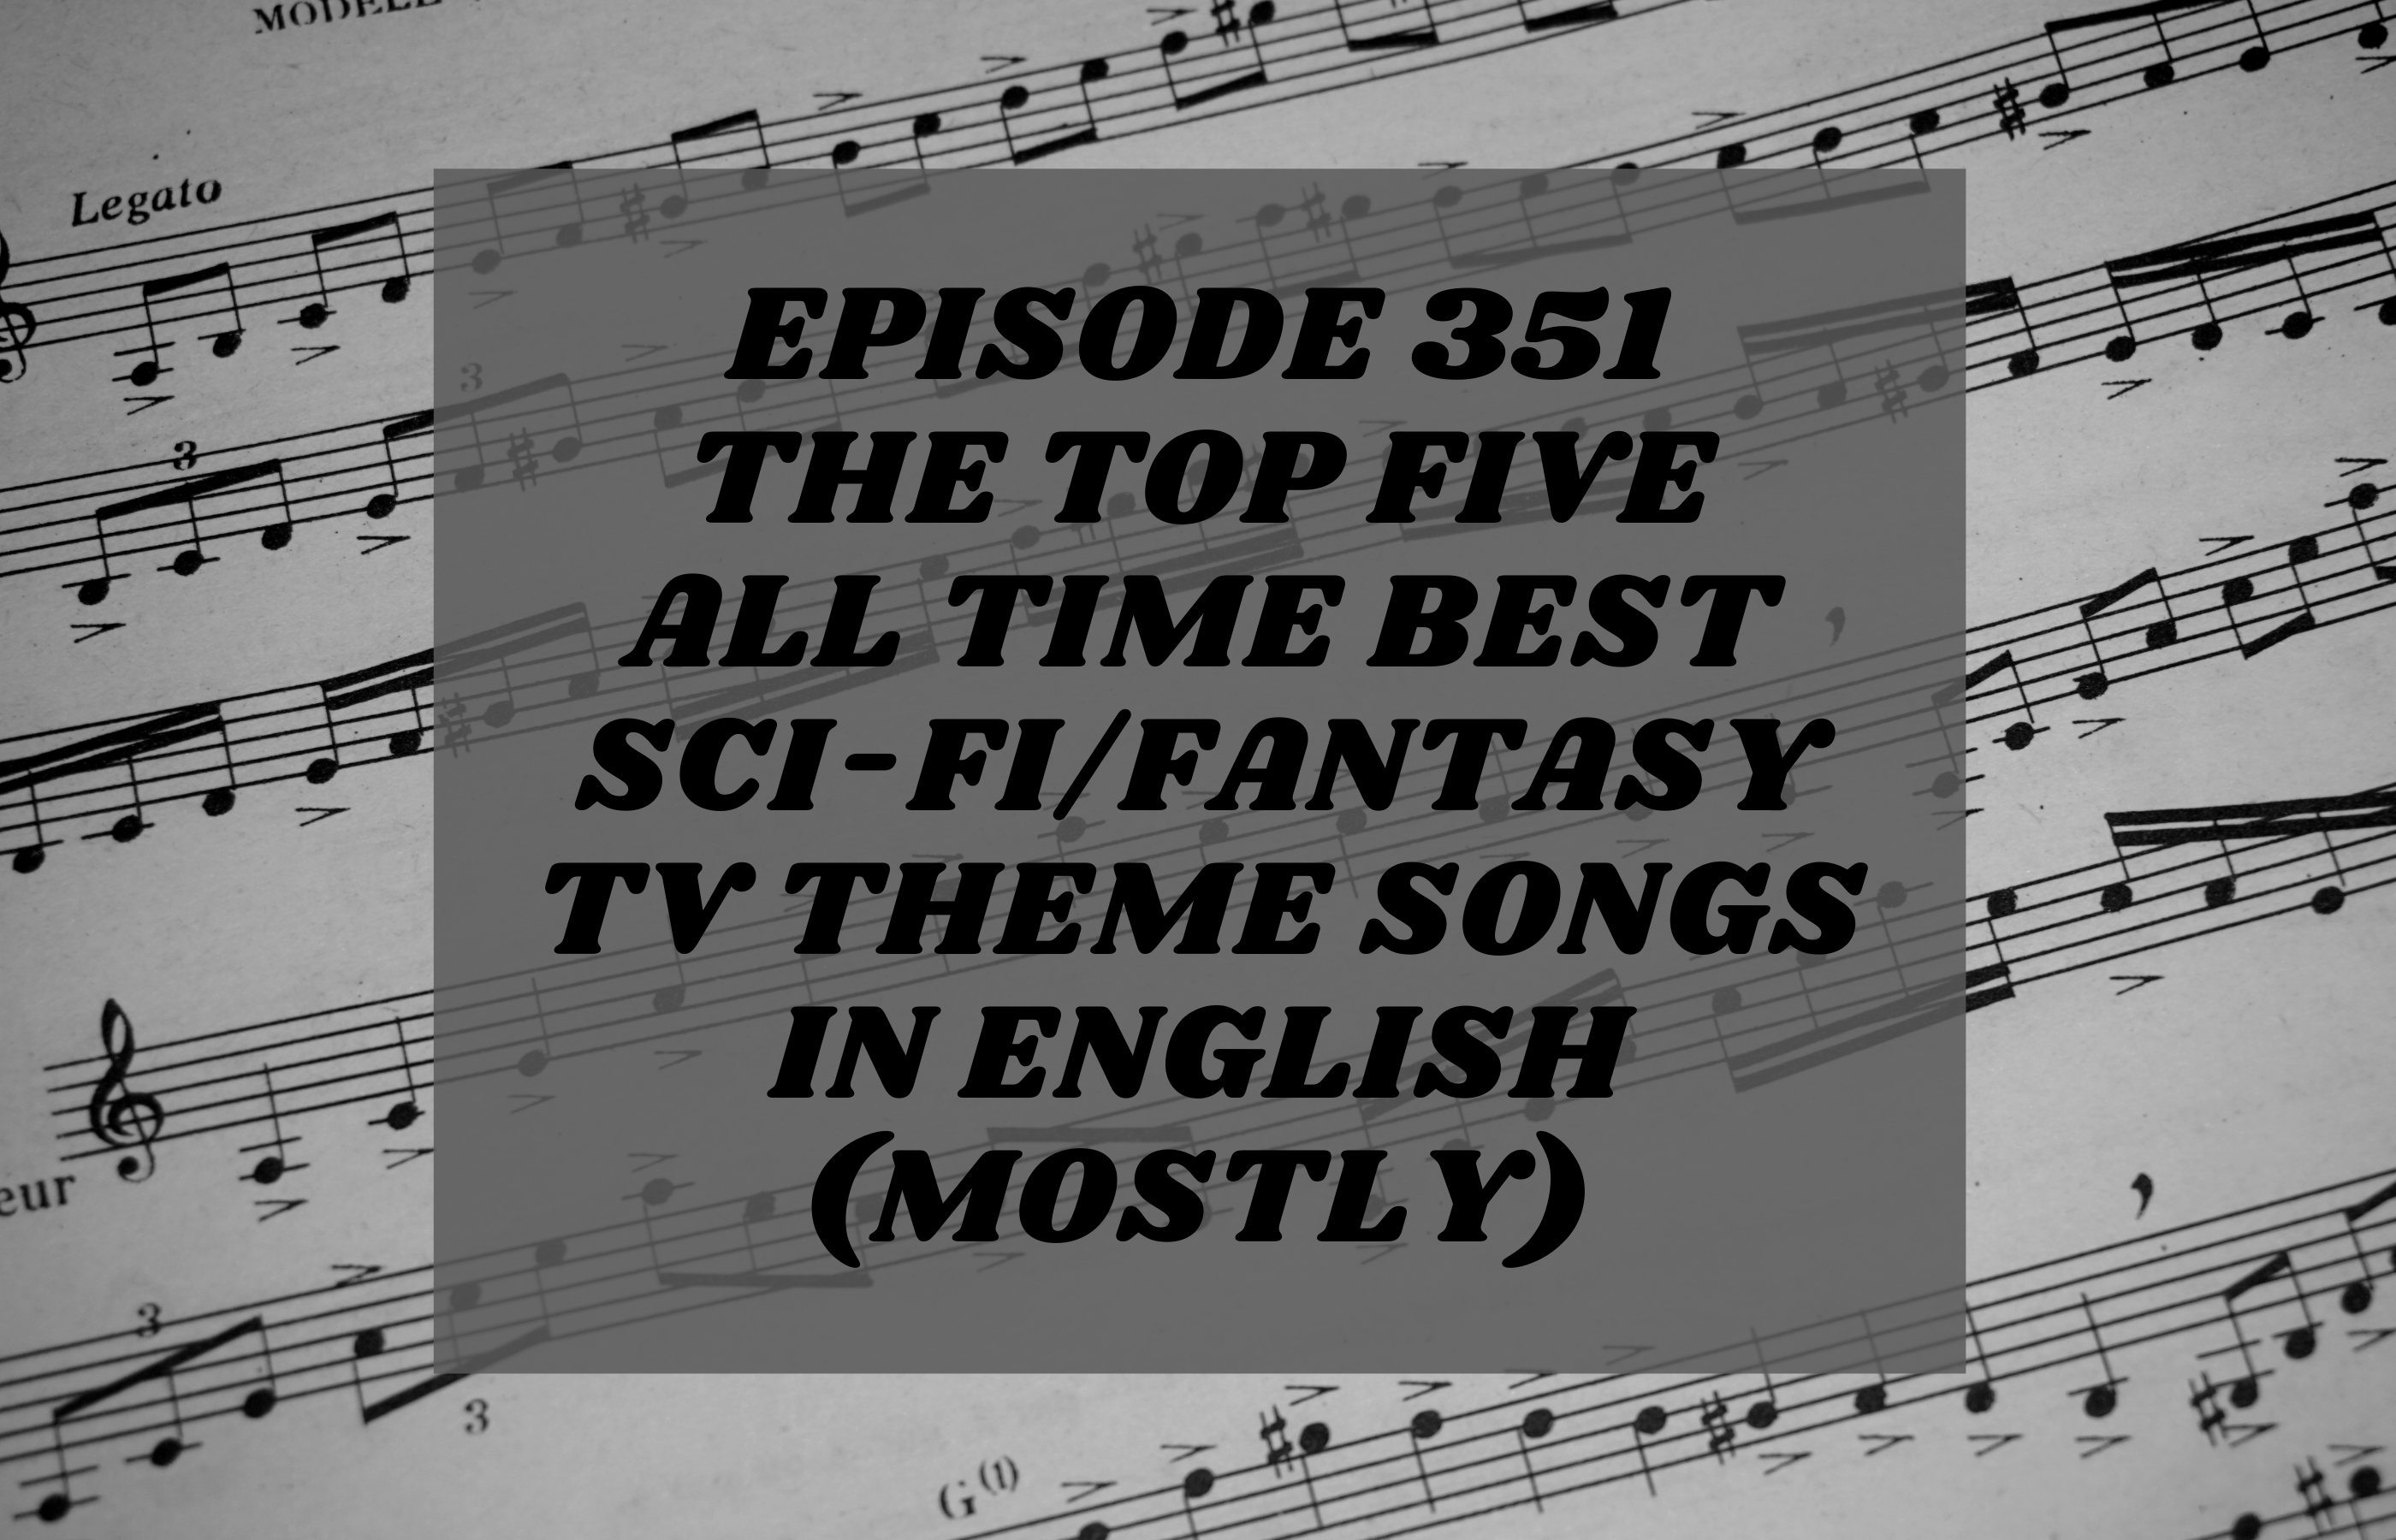 TOP FIVE THEME SONGS (from Science Fiction/Fantasy TV Shows’ Opening Credits with Lyrics that Are in English) OF ALL TIME – SA351